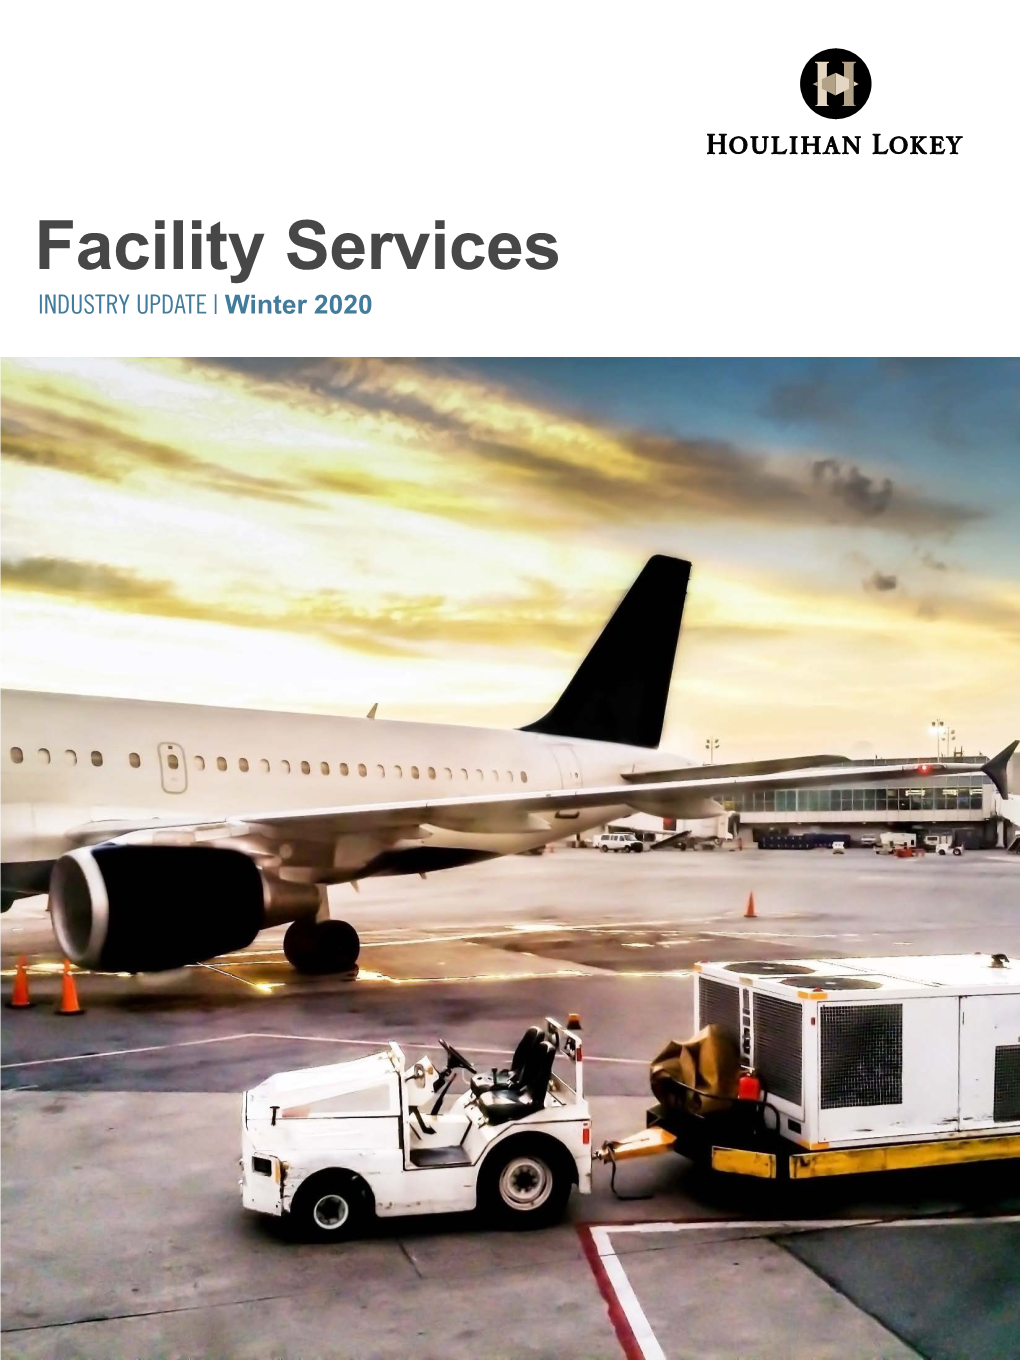 Facility Services INDUSTRY UPDATE | Winter 2020 Houlihan Lokey Facility Services Update